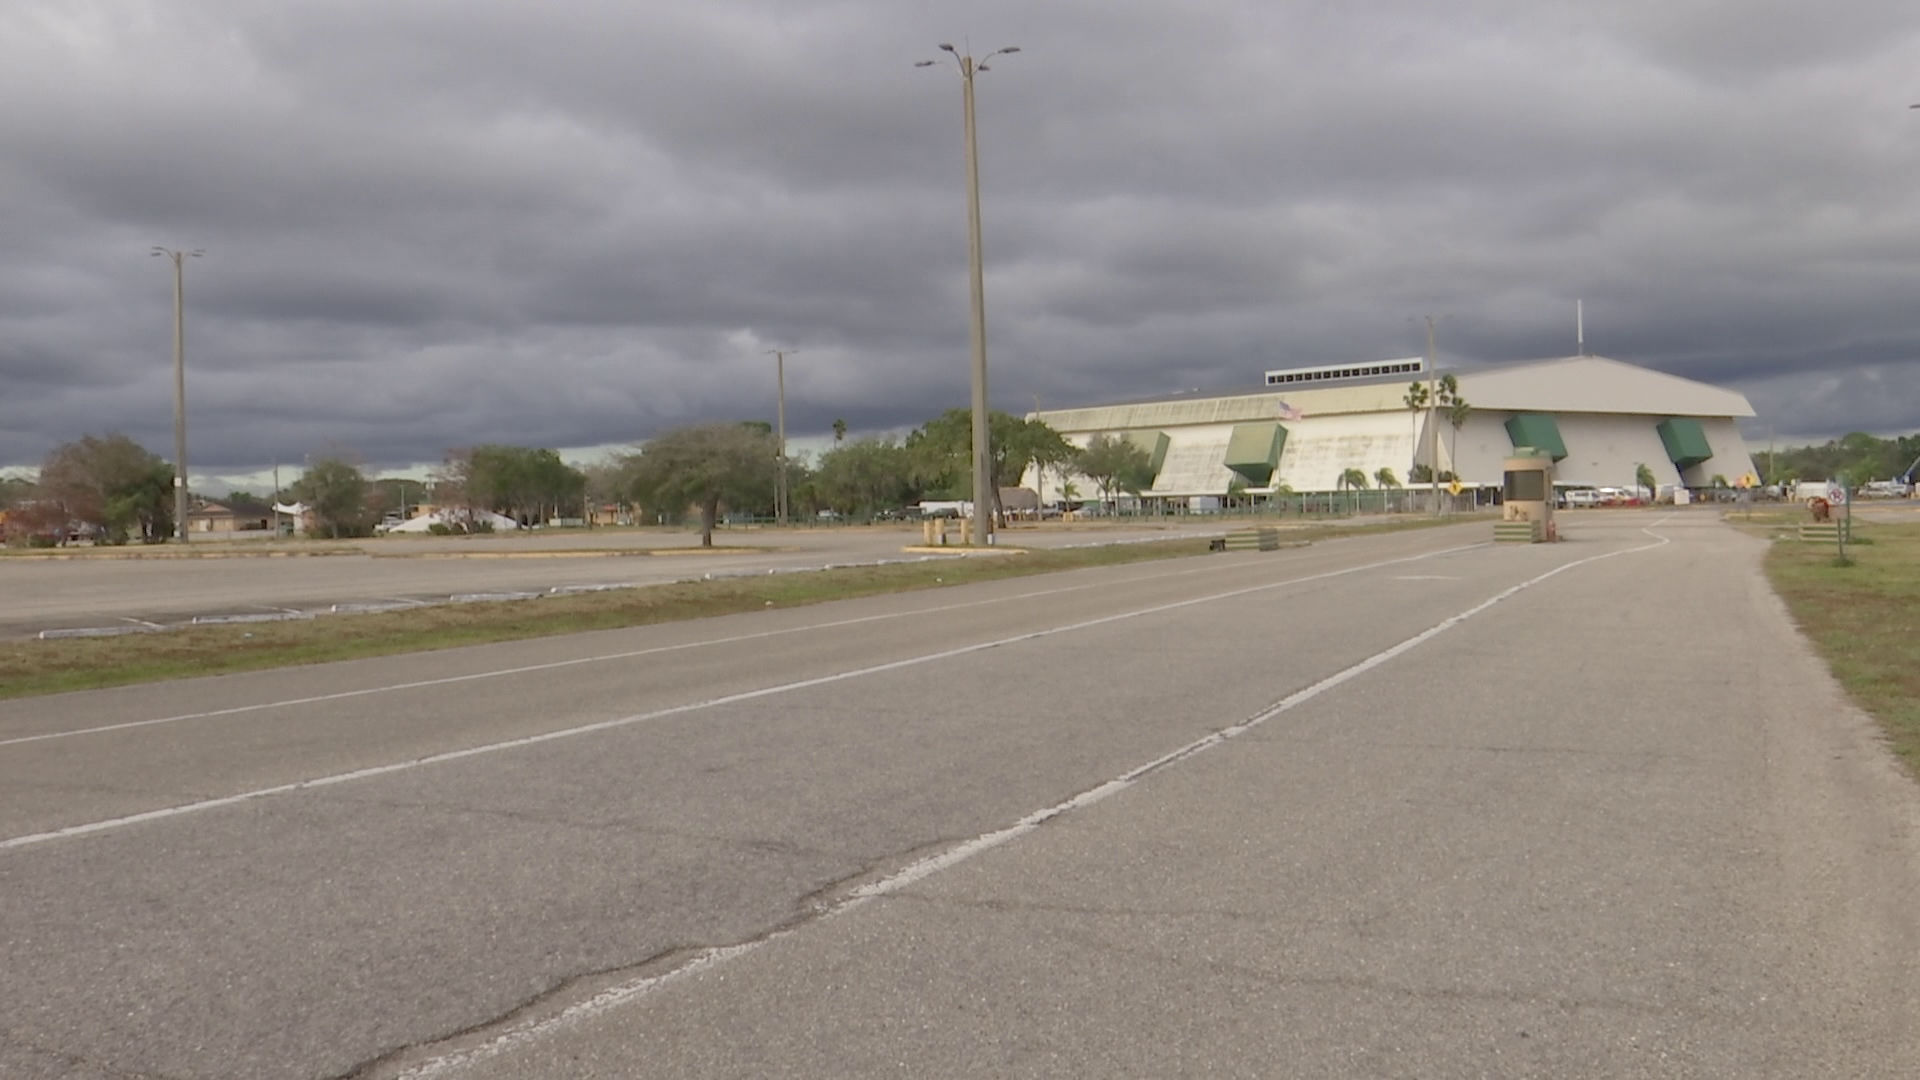 Decision about the future of the Lee Civic Center WINK News